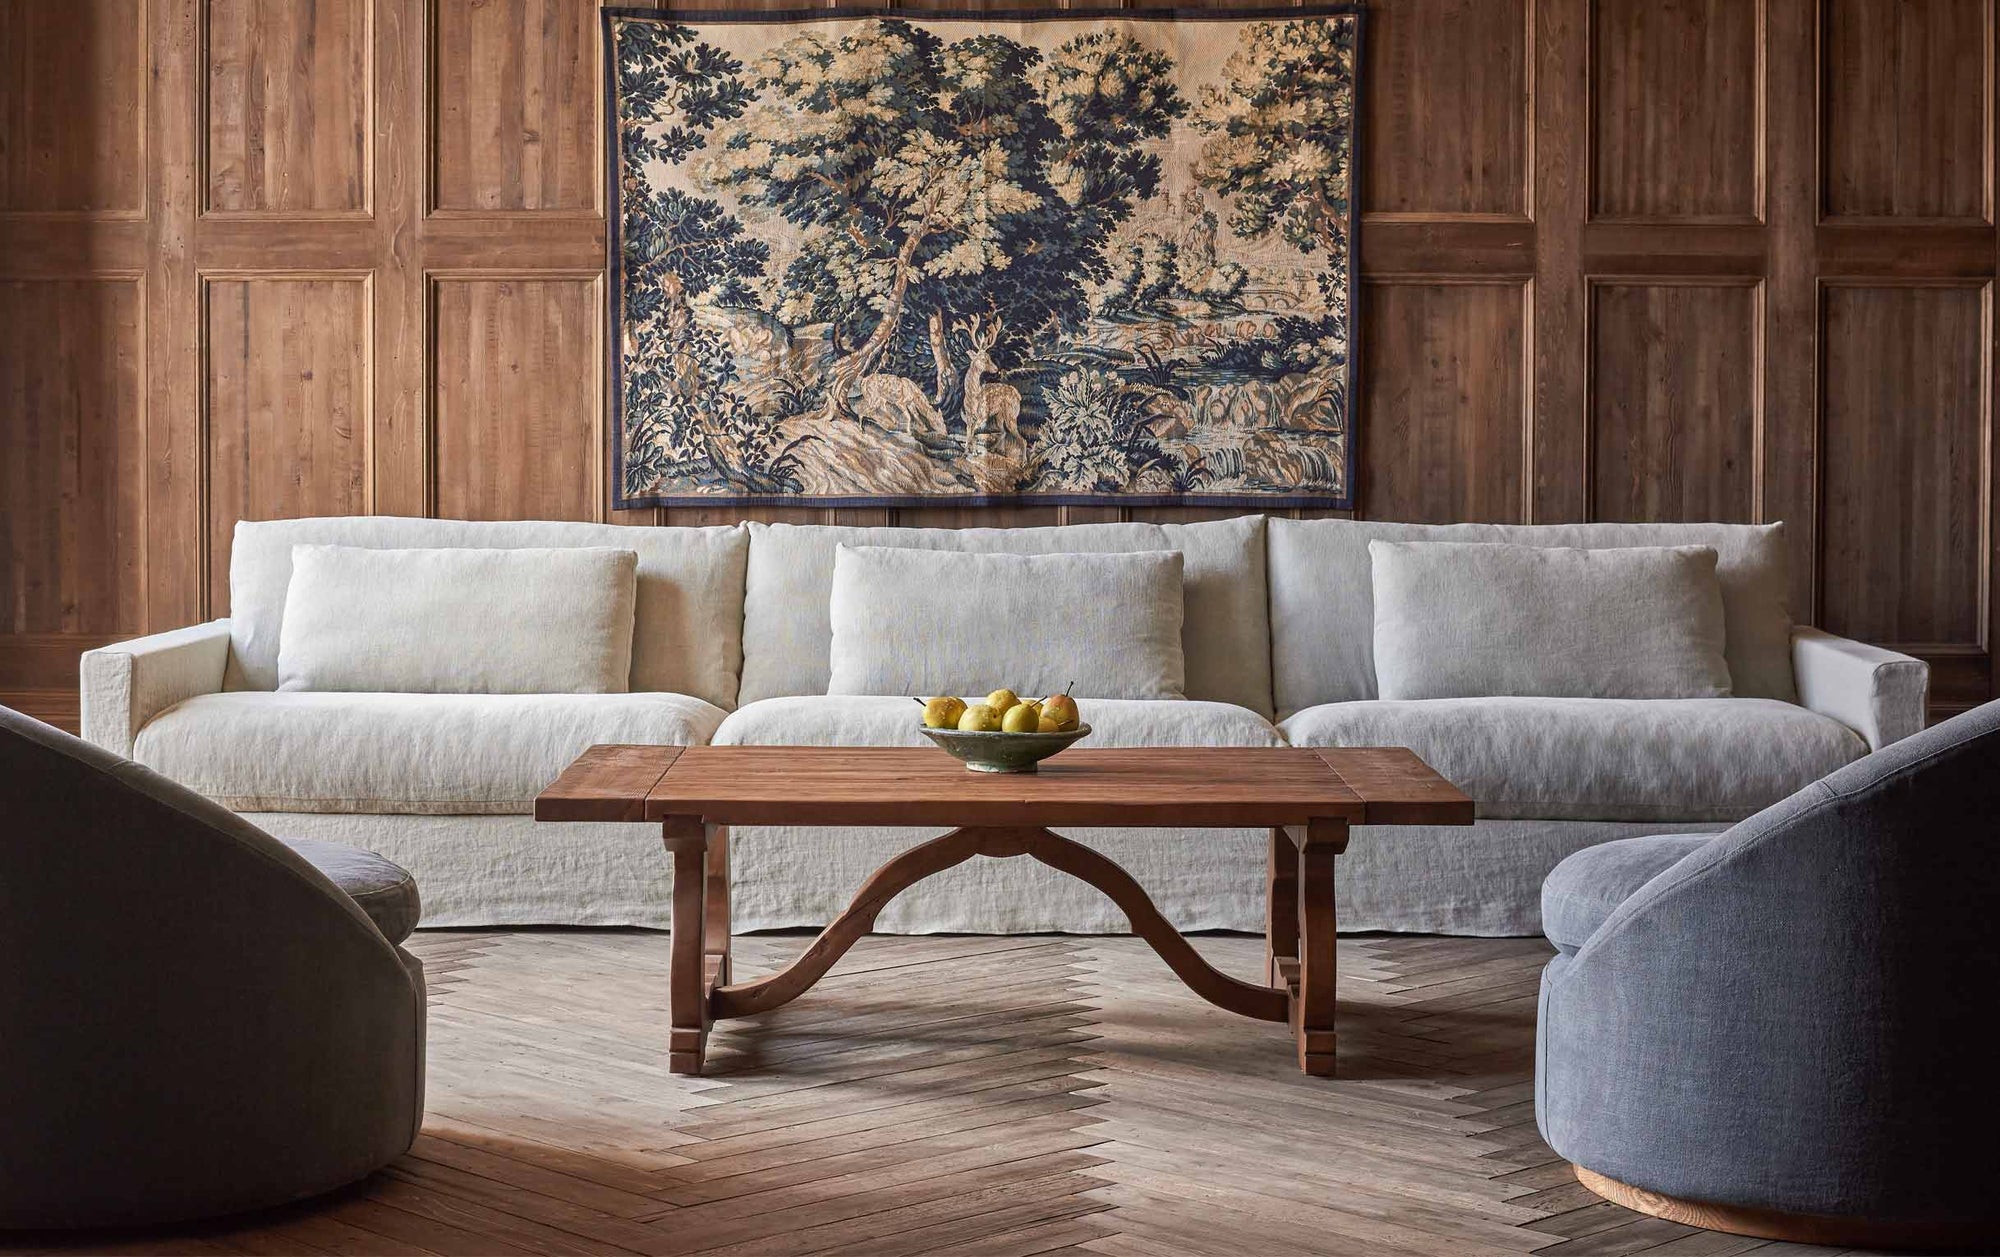 Leona Coffee Table in 100% Reclaimed Chinese Heritage Pine, a medium, bosc pear shade with earthy undertones, placed in a decorated, wood-panelled room surrounded by the Devyn Sectional and two Olea Chairs